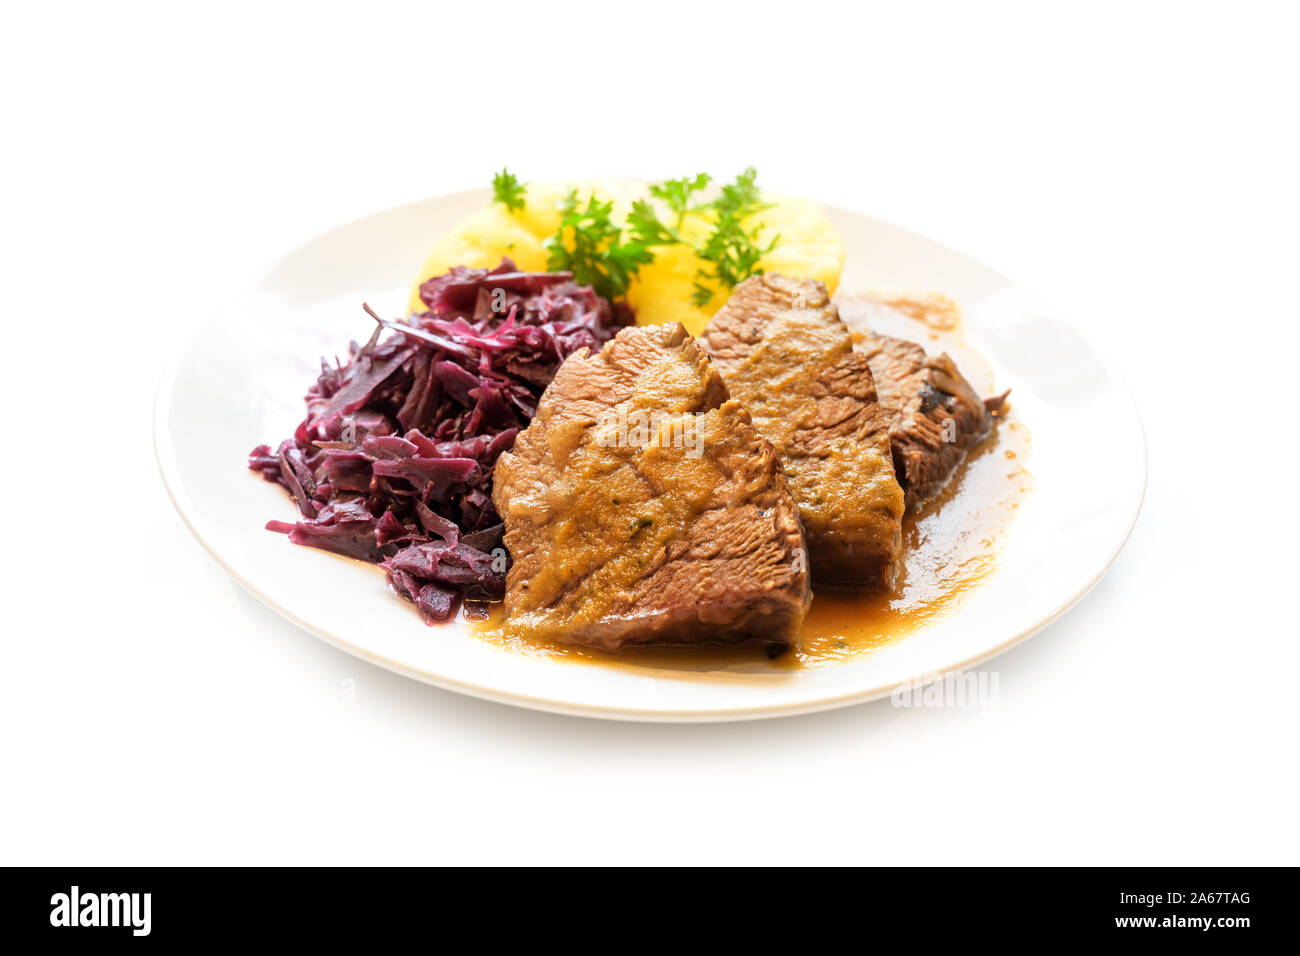 braised beef with potatoes, red cabbage and parsley garnish on a plate, isolated on a white background, selected focus, very narrow depth of field Stock Photo